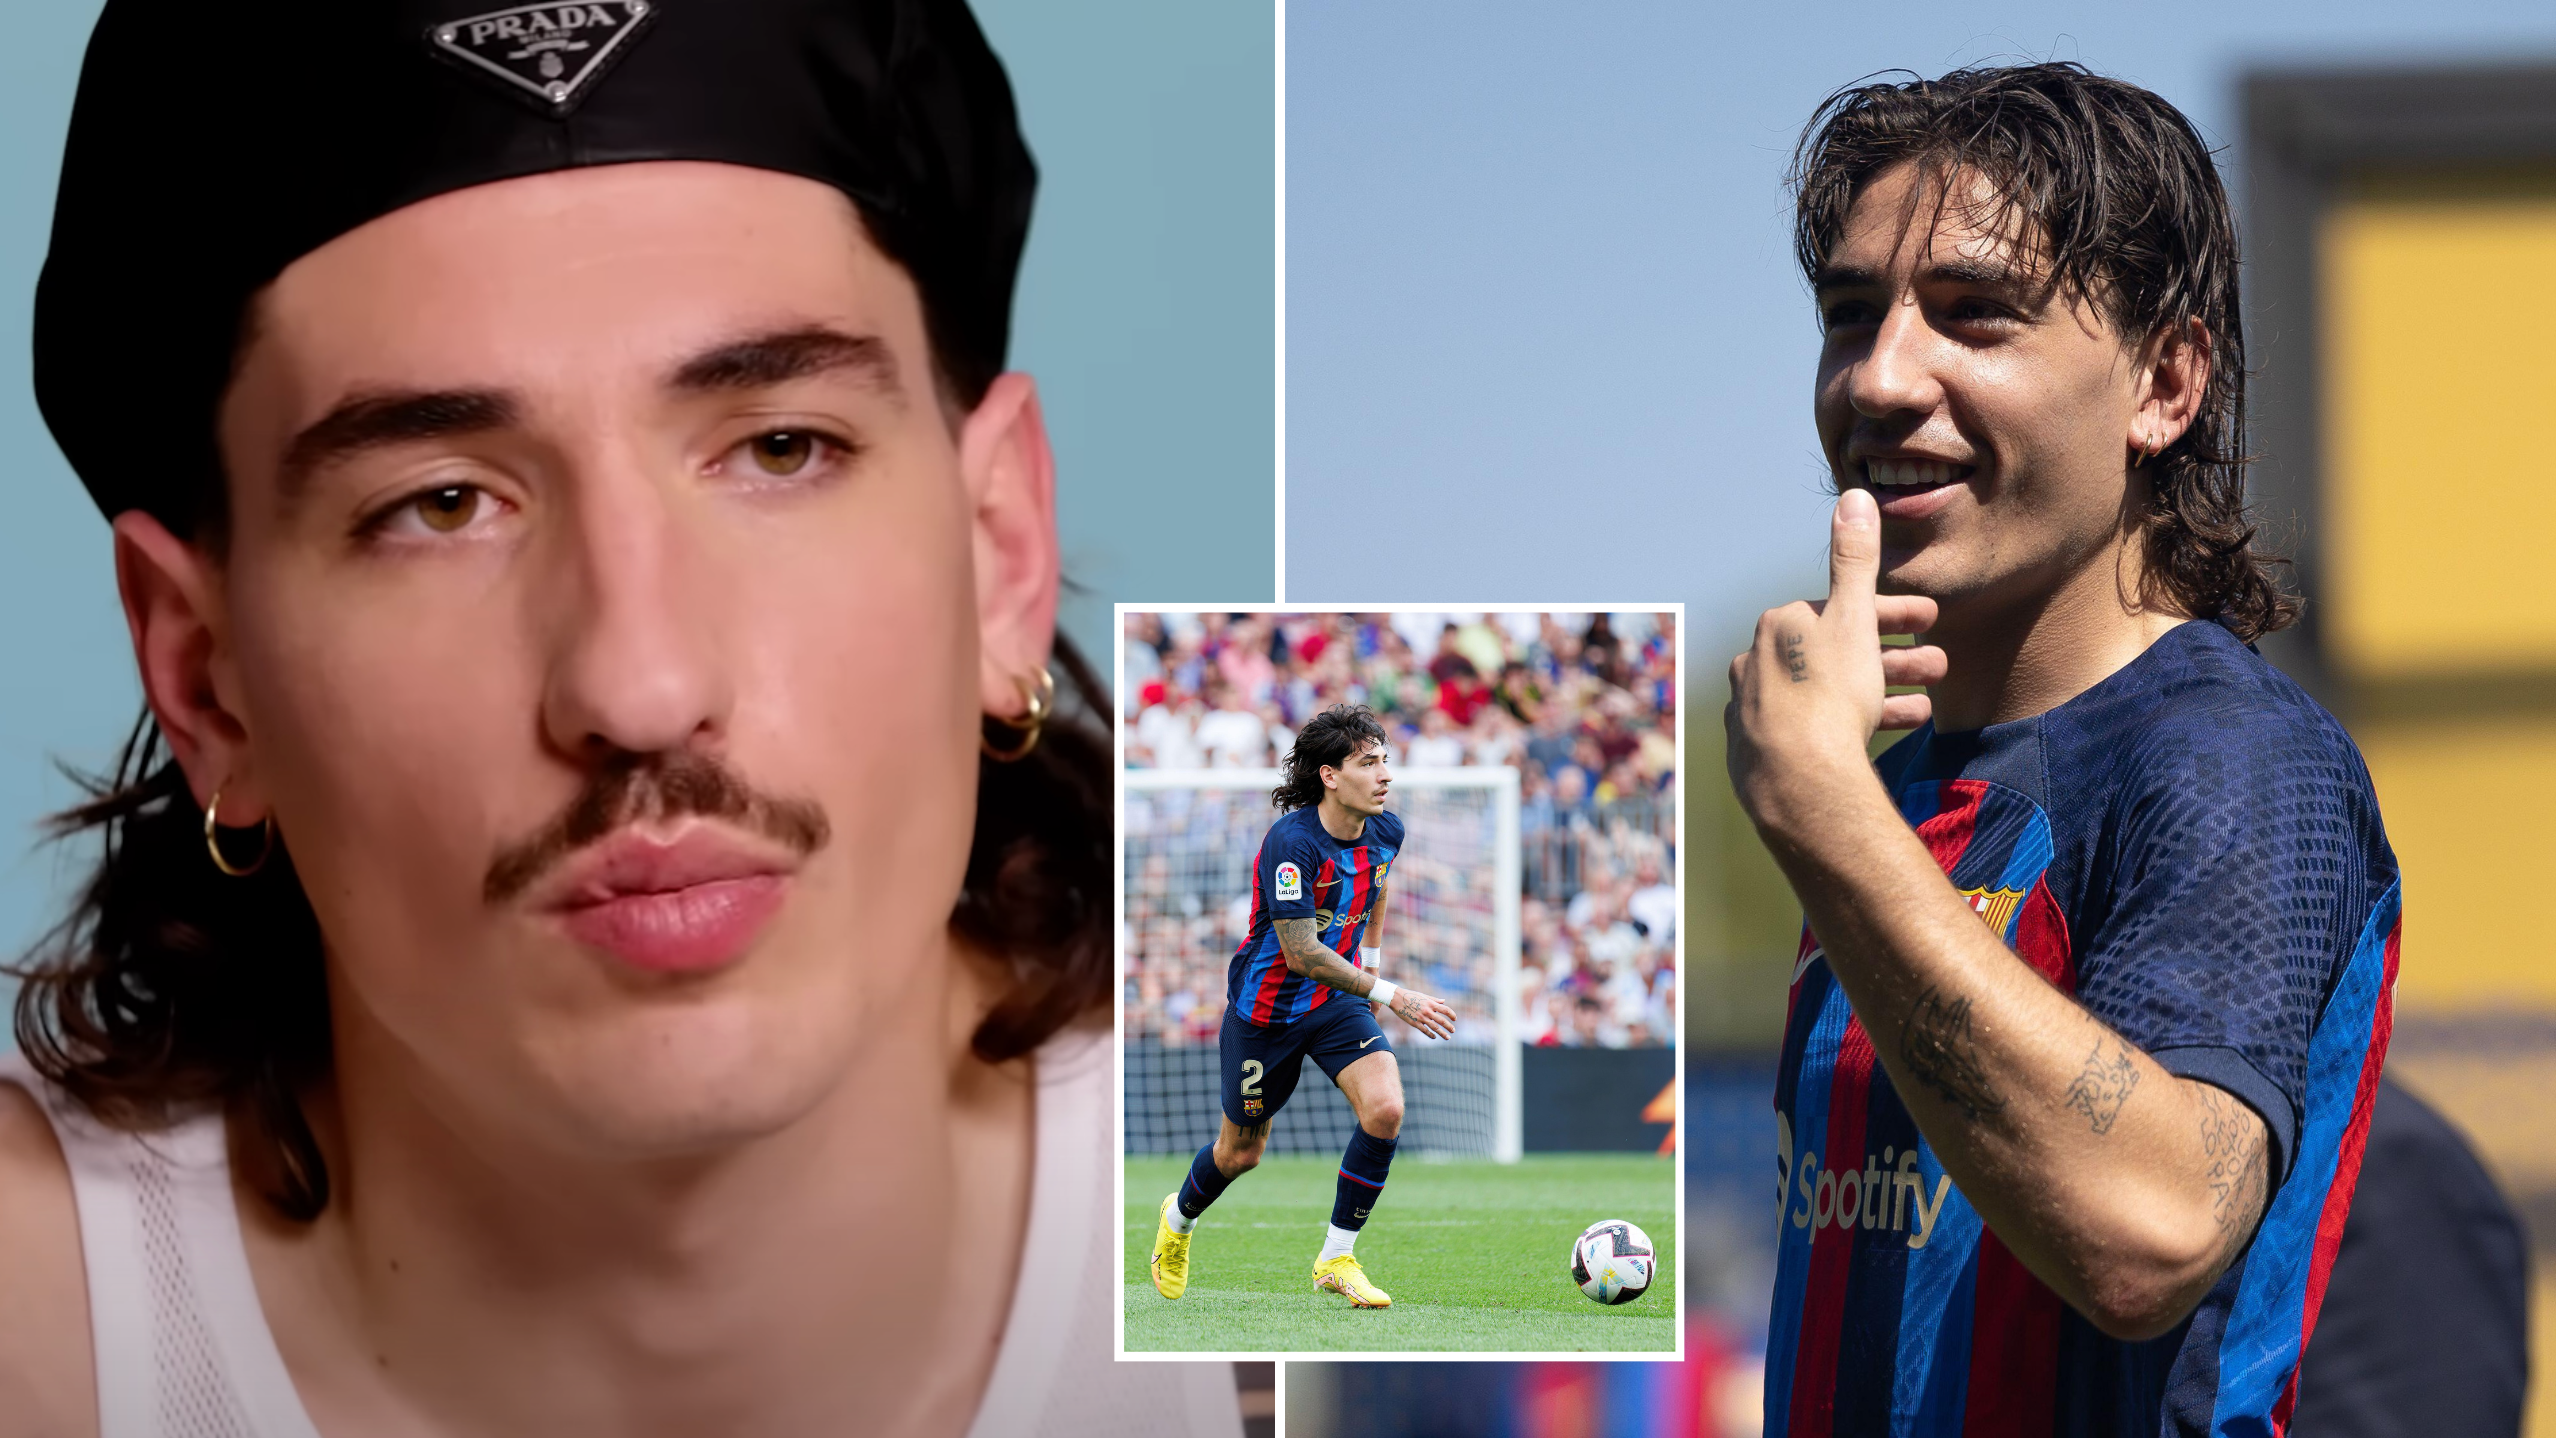 Hector Bellerin questions why Ukraine gets more attention than Palestine